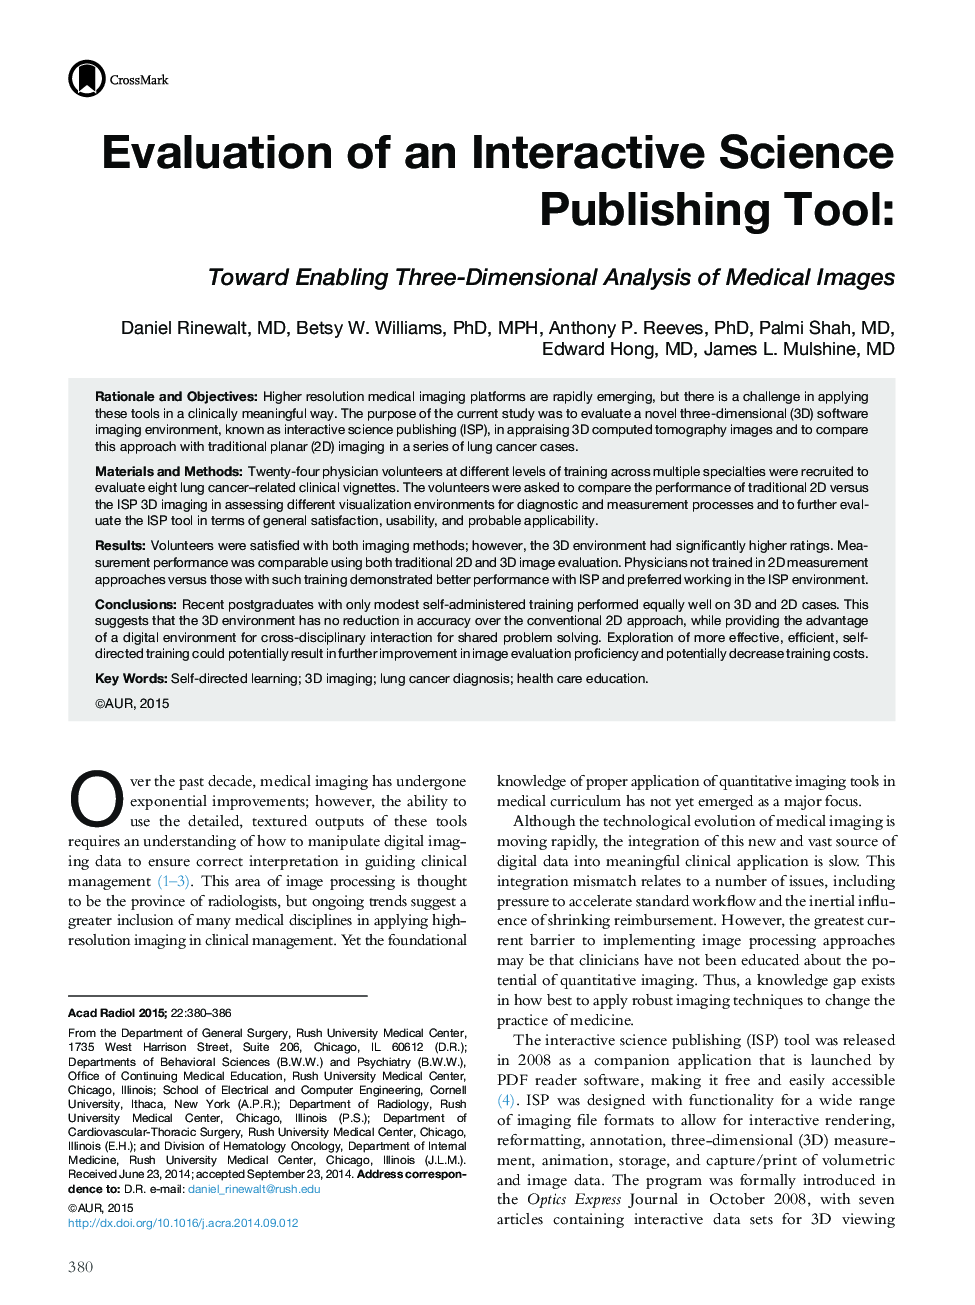 Evaluation of an Interactive Science Publishing Tool